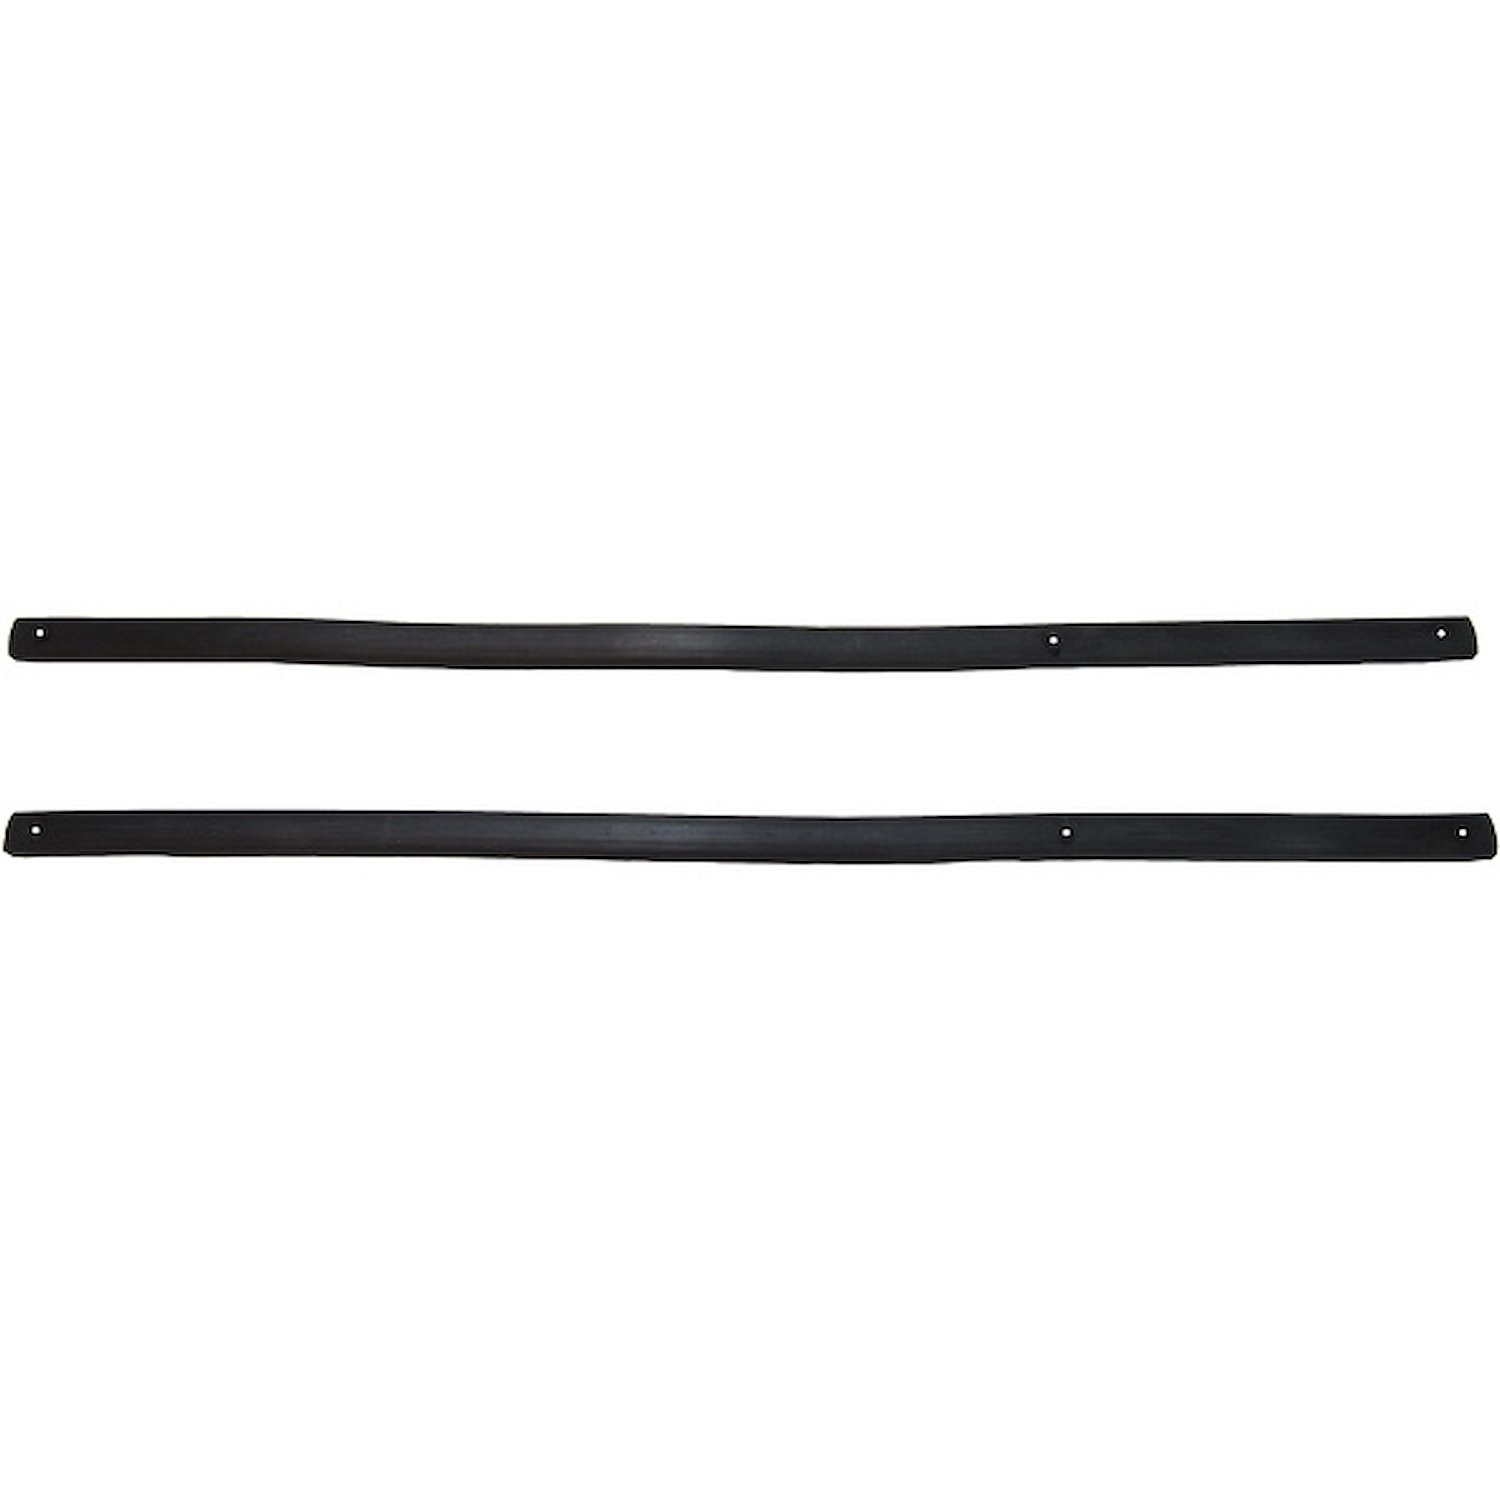 60-0428-42 Hood to Cowl Weatherstrip Fits Select 1949-1952 Chevy Styleline Deluxe, Chevy Styleline Special, Chevy Bel Air